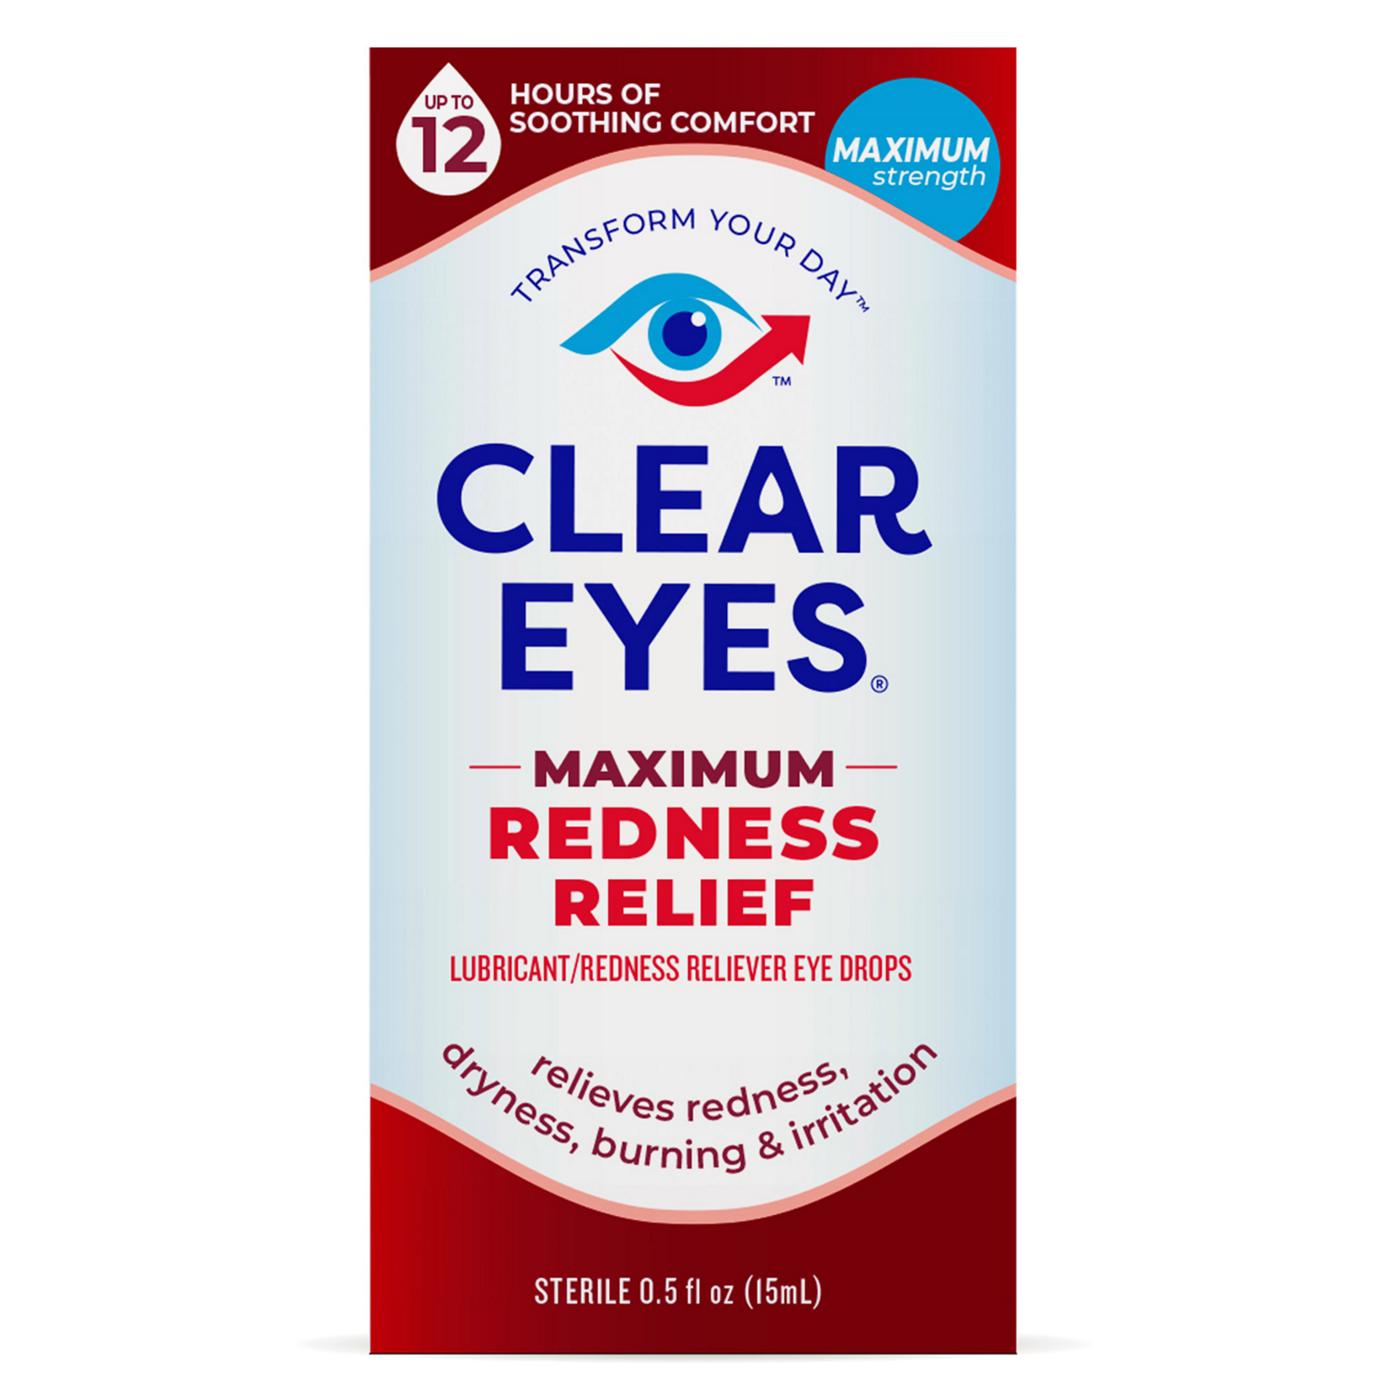 Clear Eyes Max Redness Relief Eye Drops; image 1 of 5